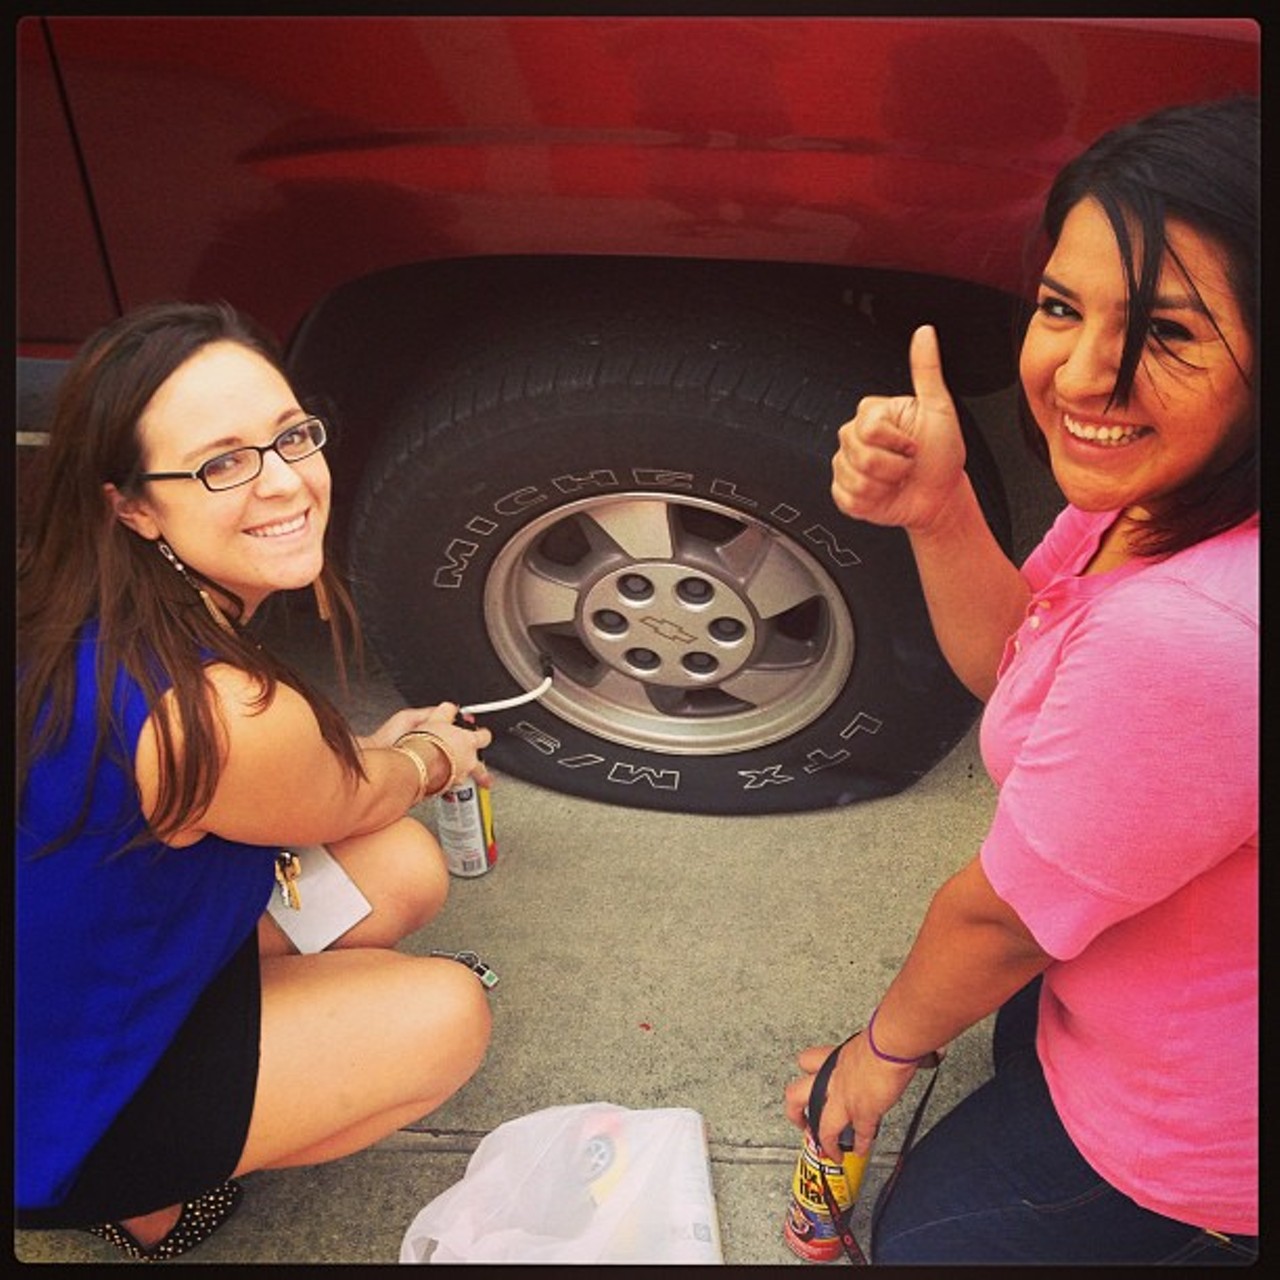 Instagram user @hopeoverexperience: "When you manage a Plato's closet there's a new adventure every day.... #platoscloset #platosclosetnorthstar #flattire #fixaflat  @sacurrent #samonday"